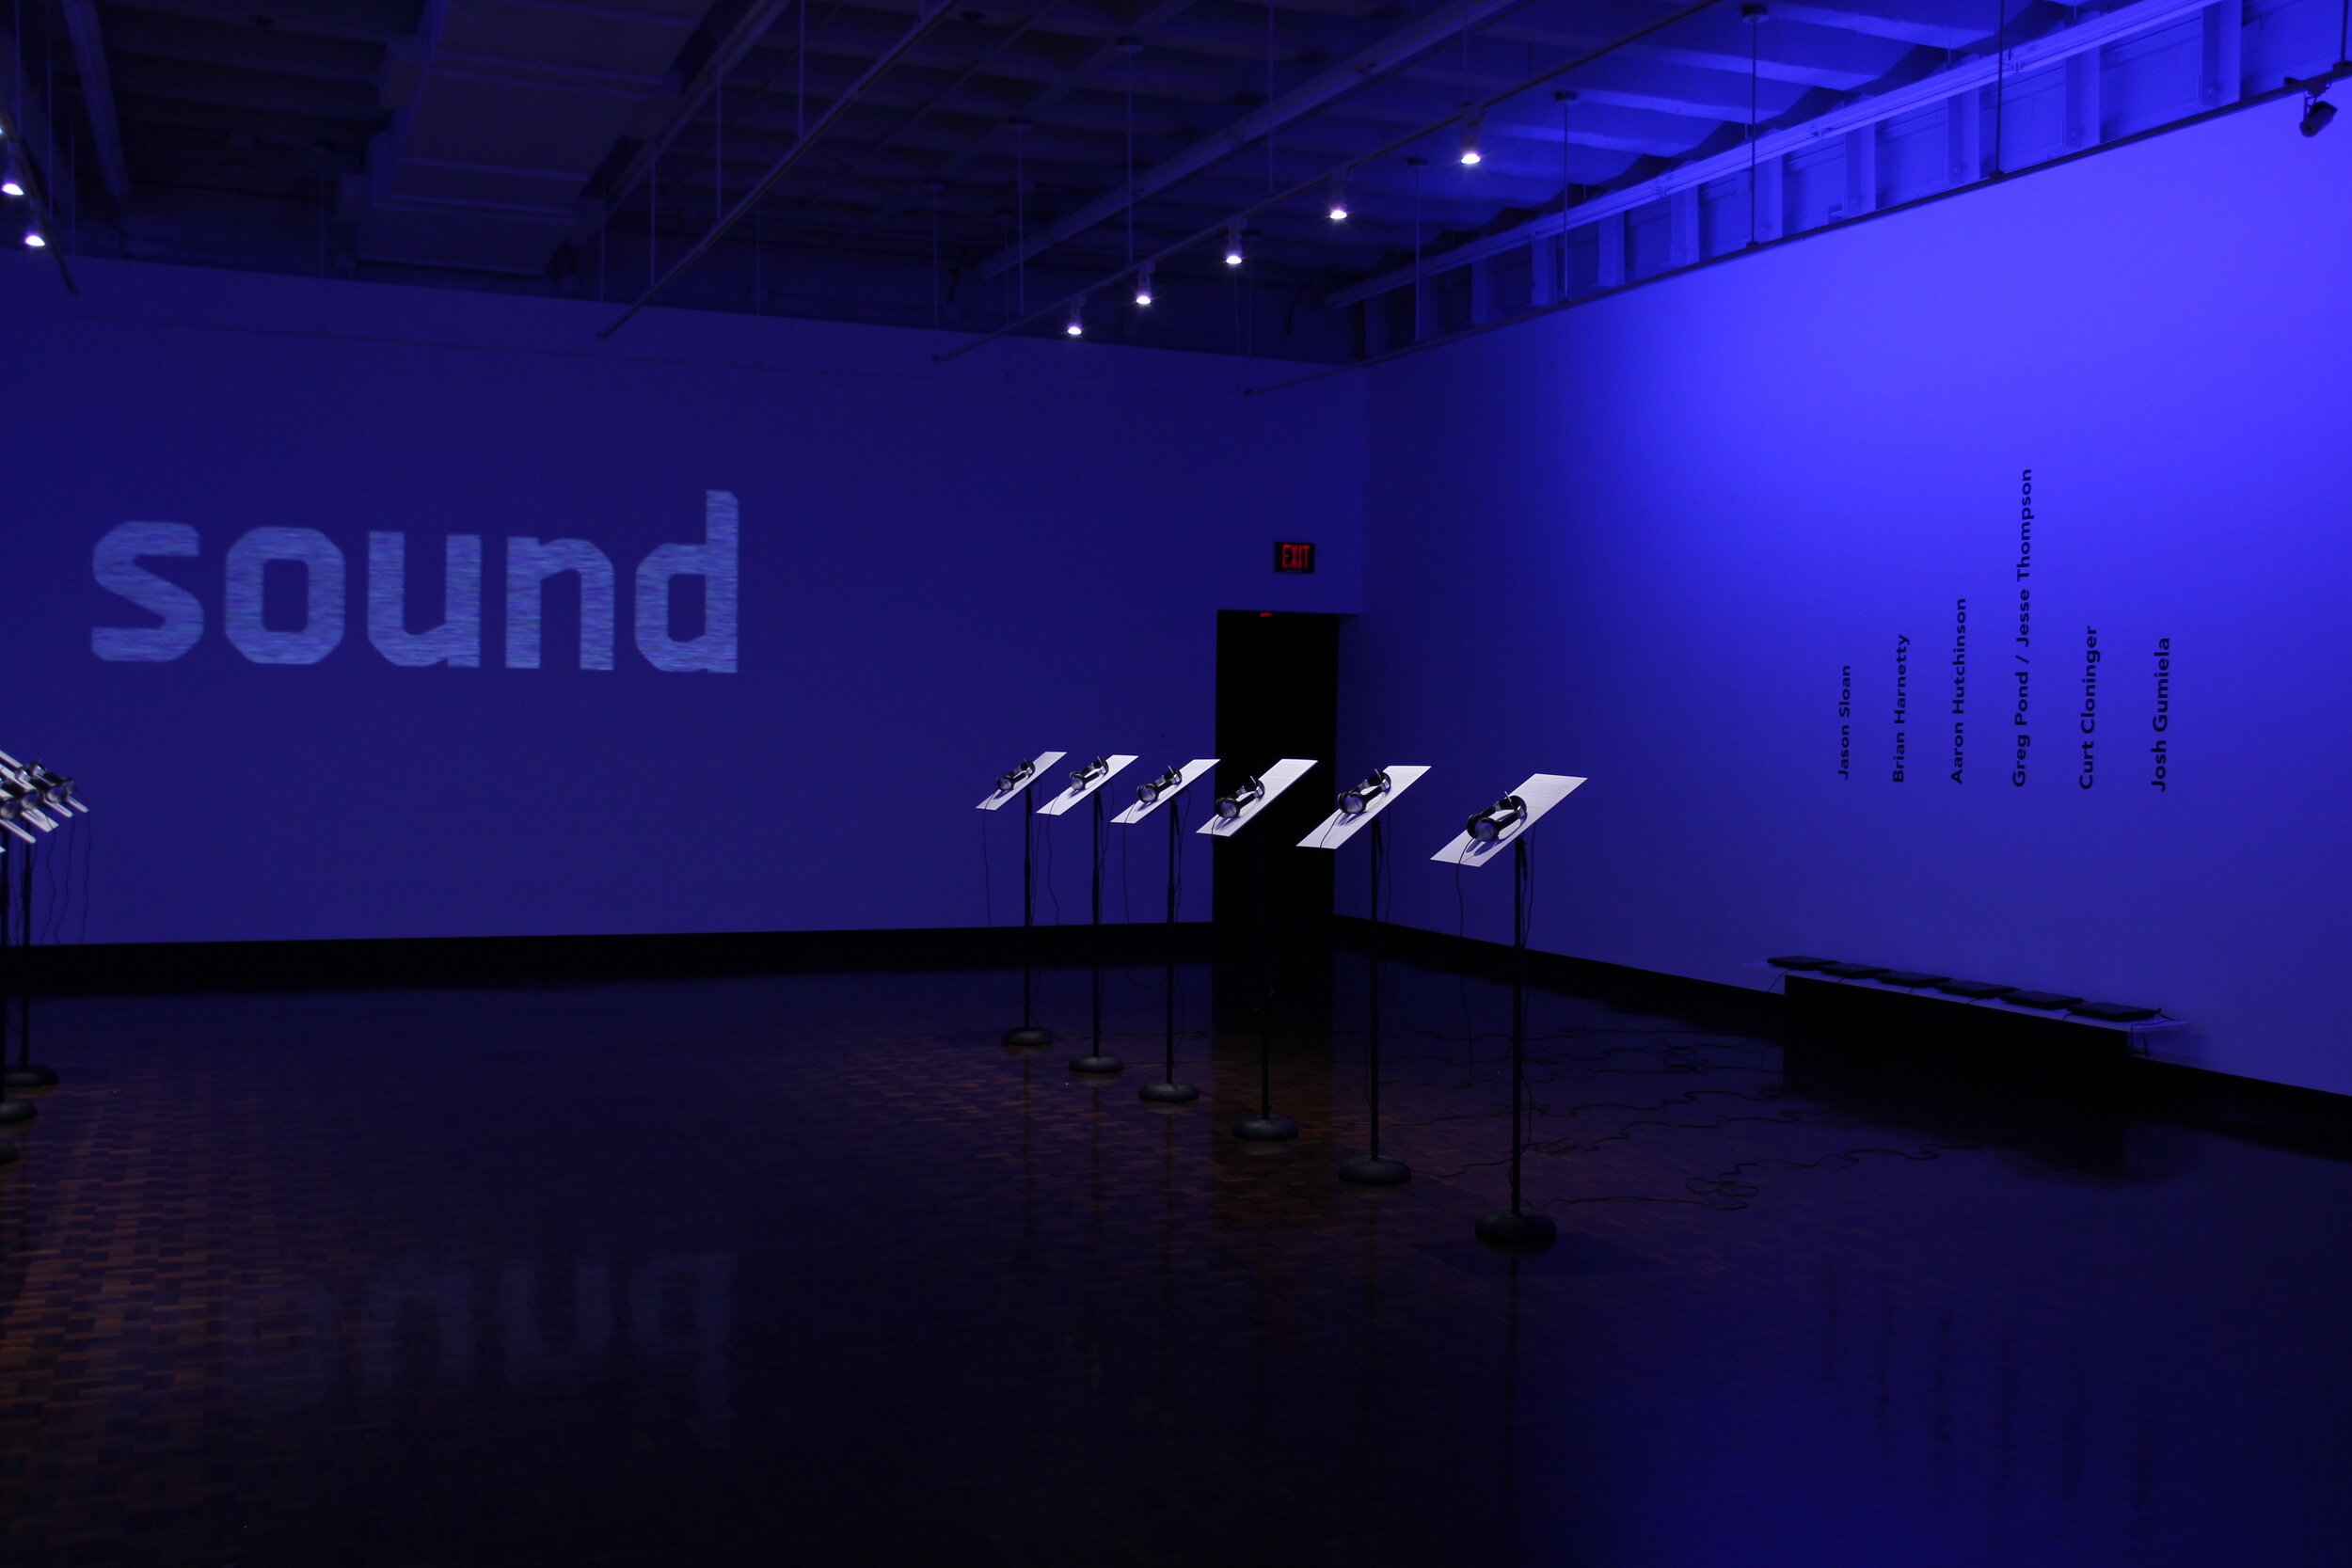  The “Sound” exhibition at Austin Peay State University, Tennessee, 2015. Photo courtesy of Michael Dickins. 